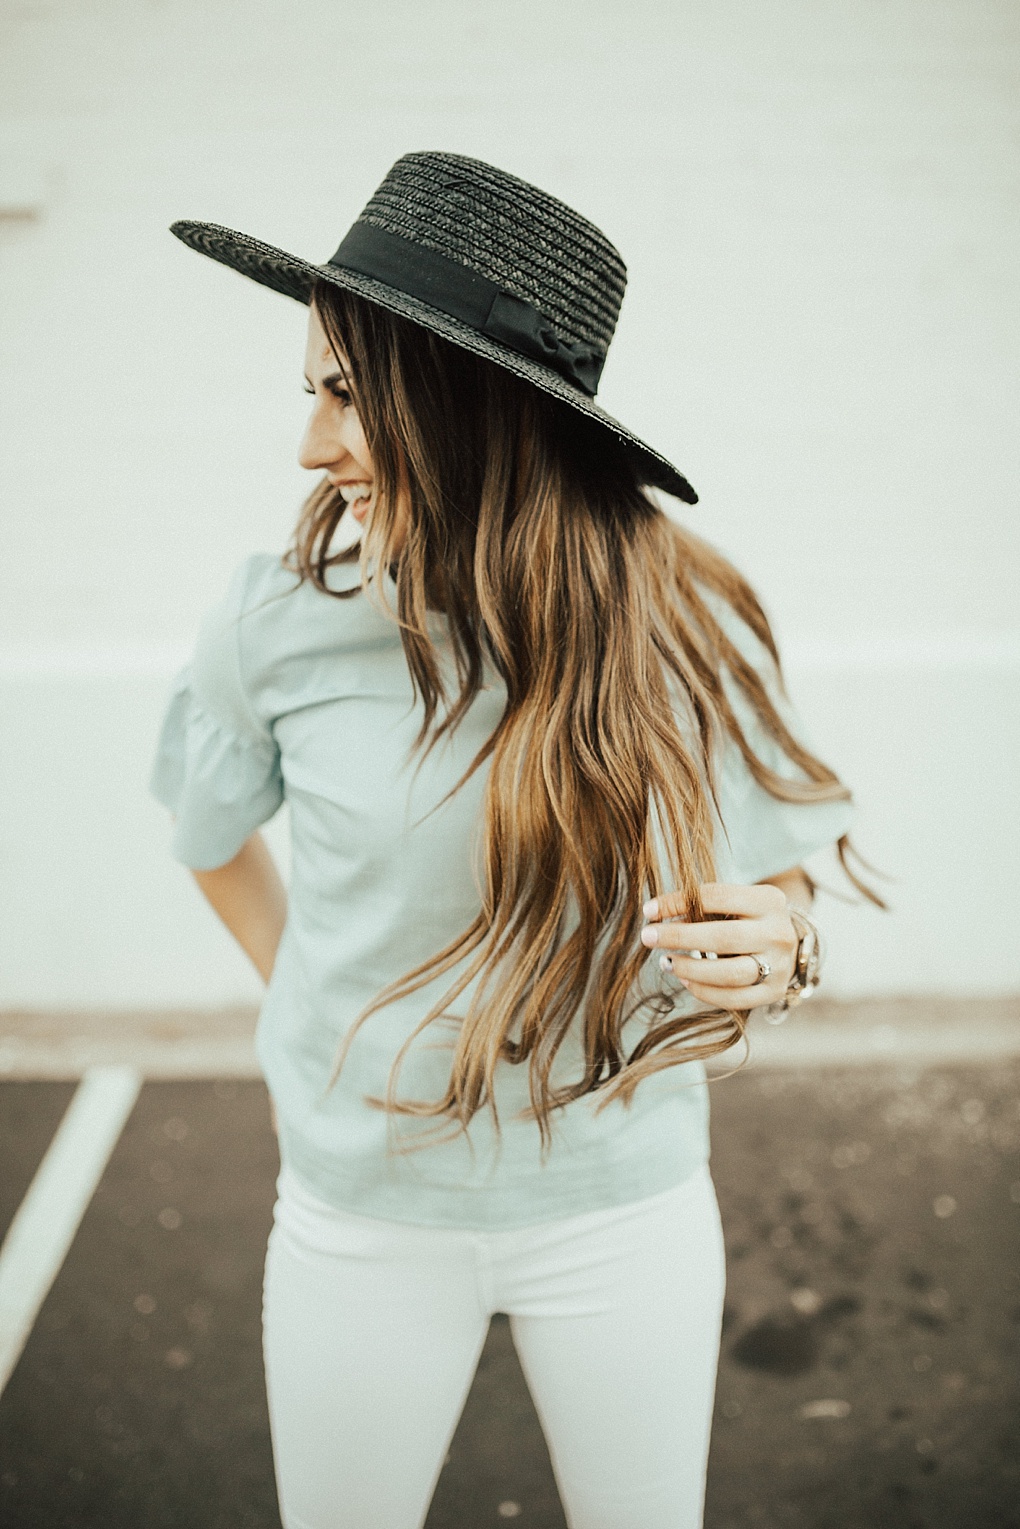 The Best Fall Jeans & Different Ways to Wear Denim by Utah fashion blogger Dani Marie